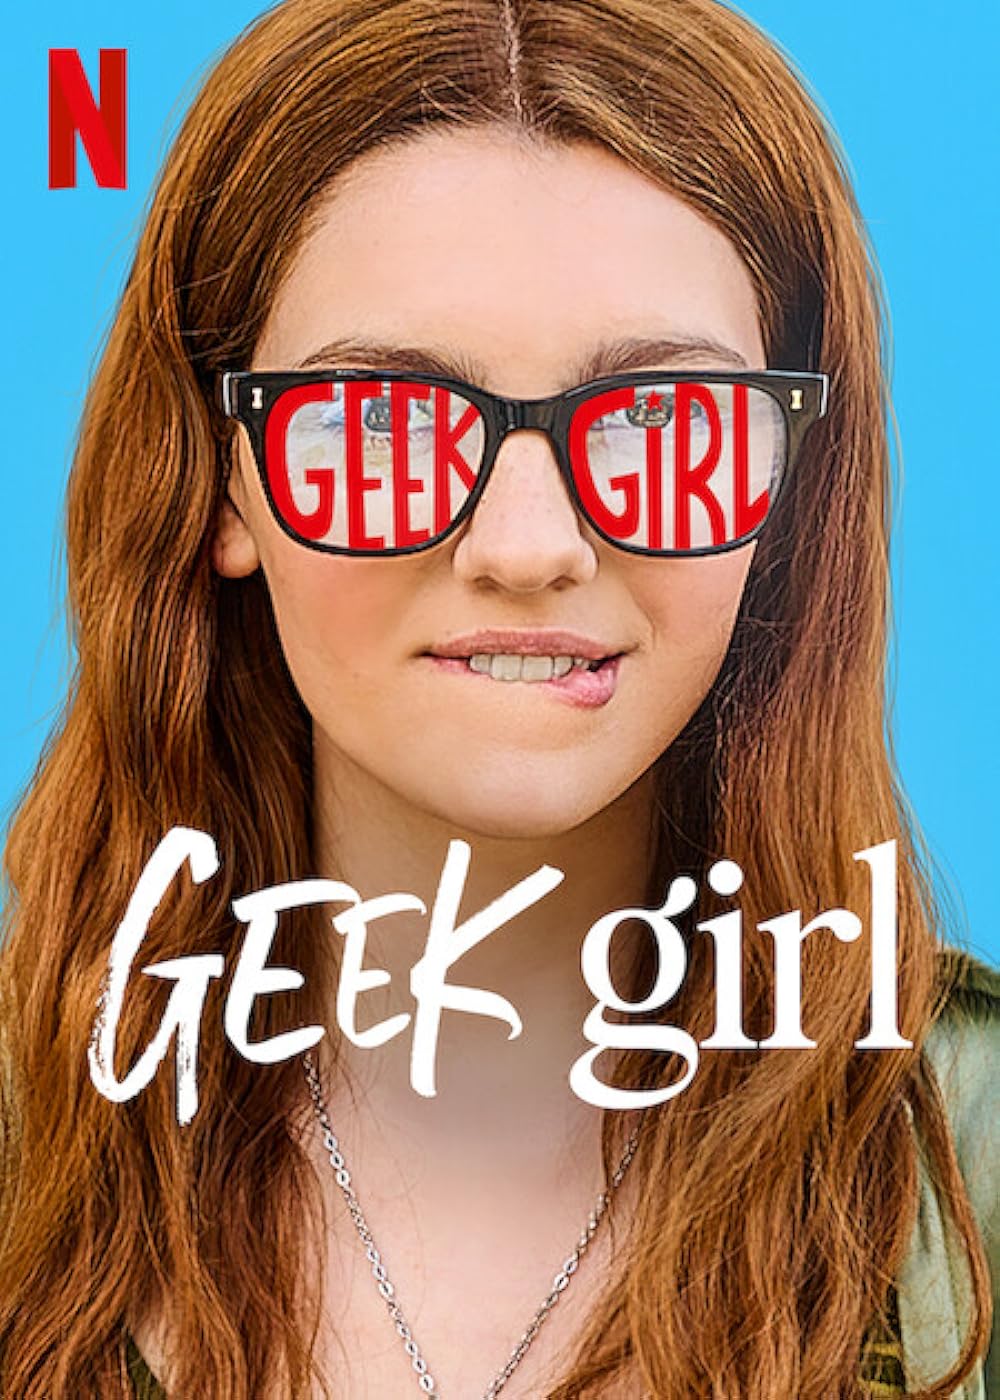 Geek Girl (May 30) - Streaming on NetflixAdapted from Holly Smale’s novels, 